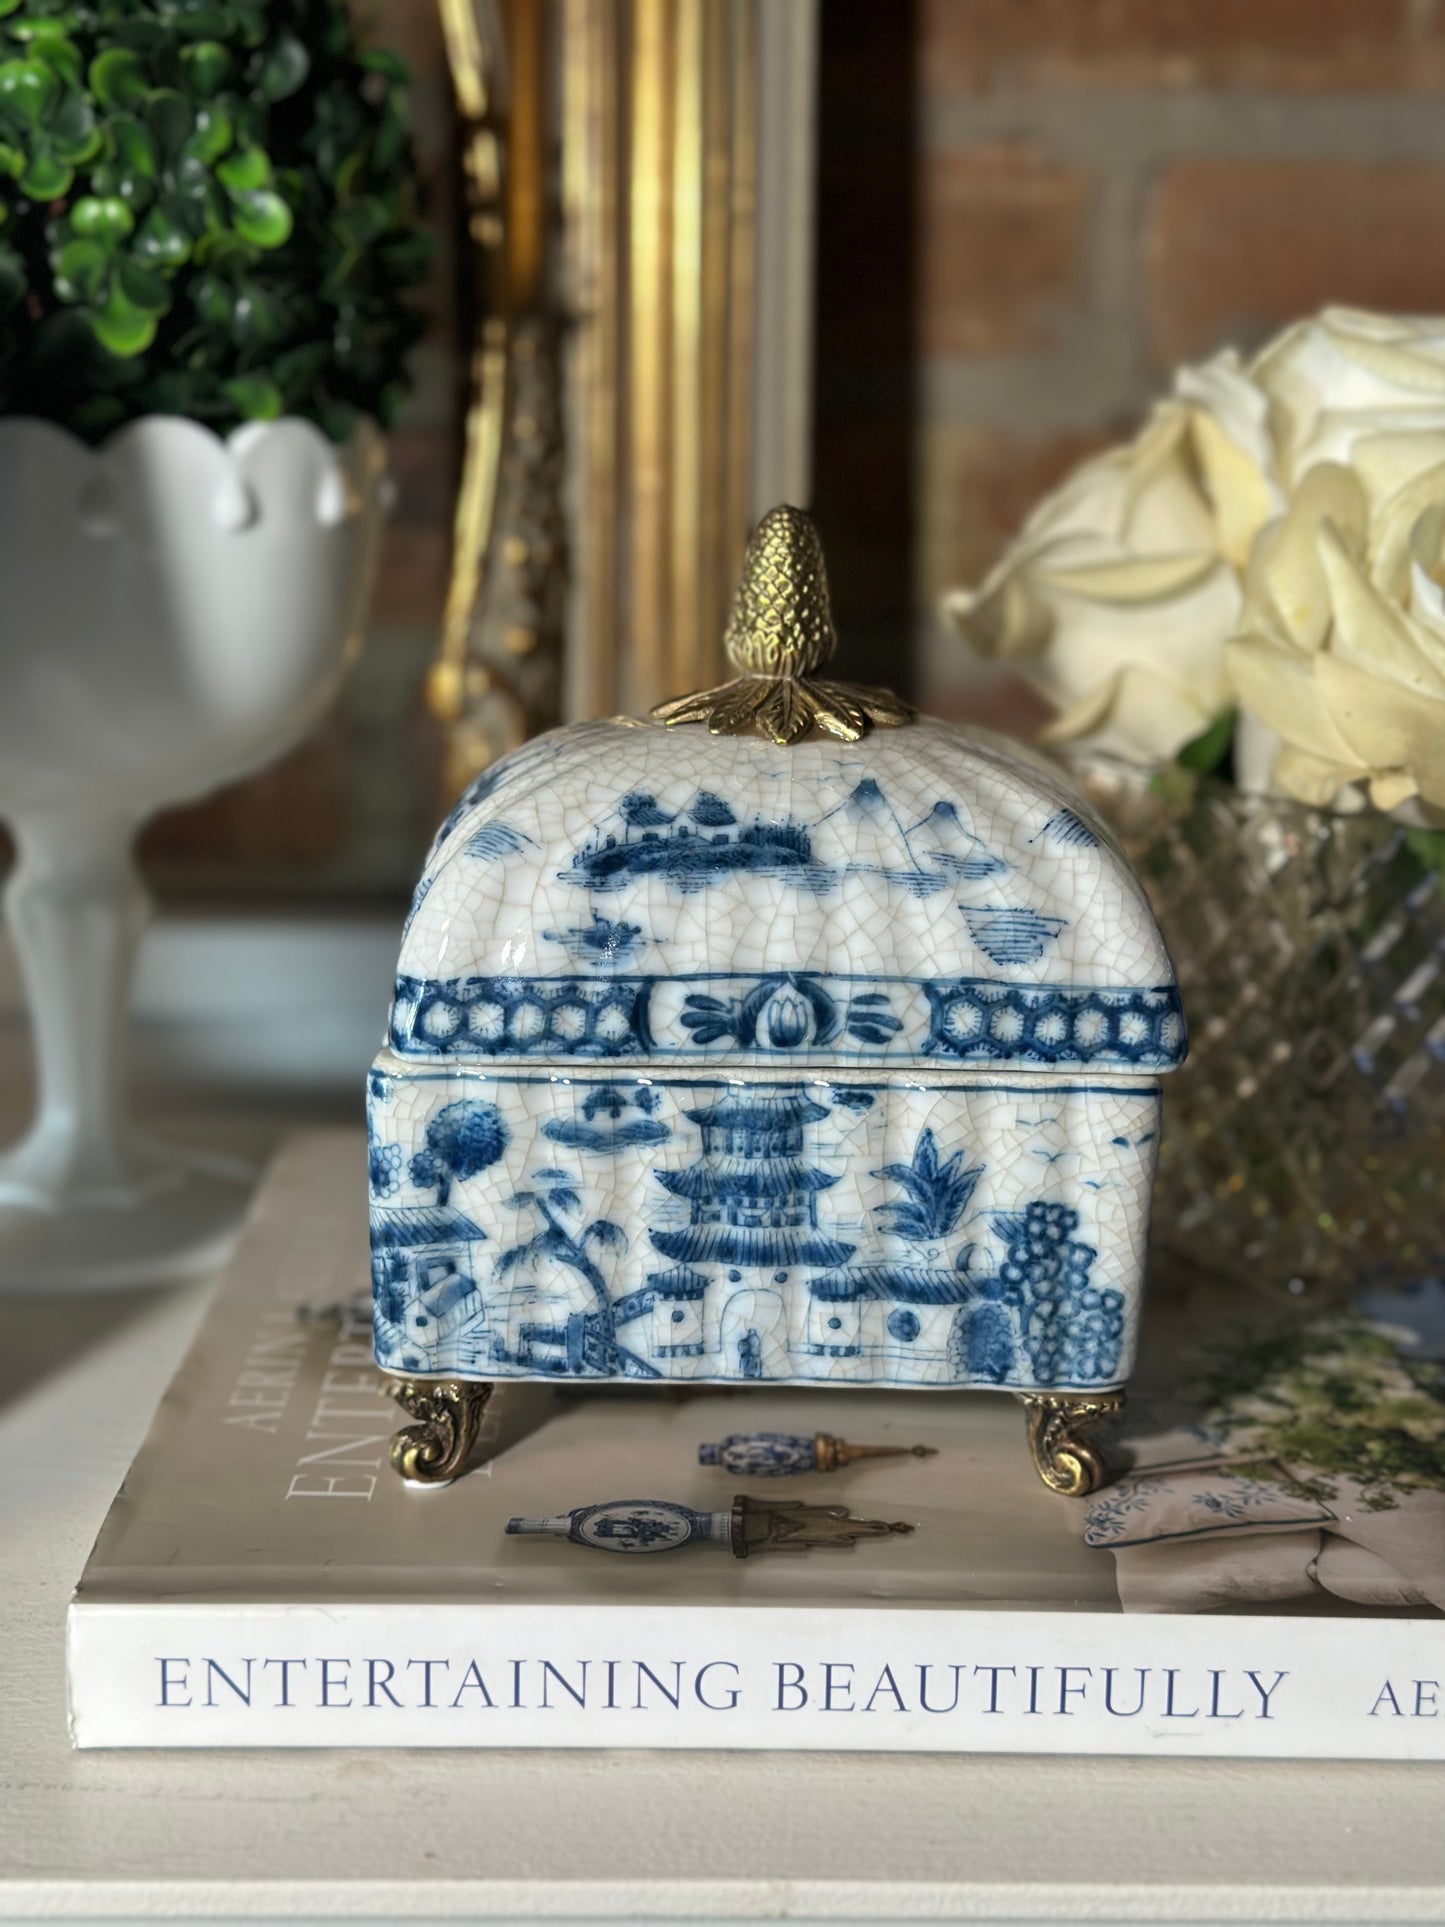 STUNNING - Blue & White Porcelain Bronze Footed Box W/ Lid